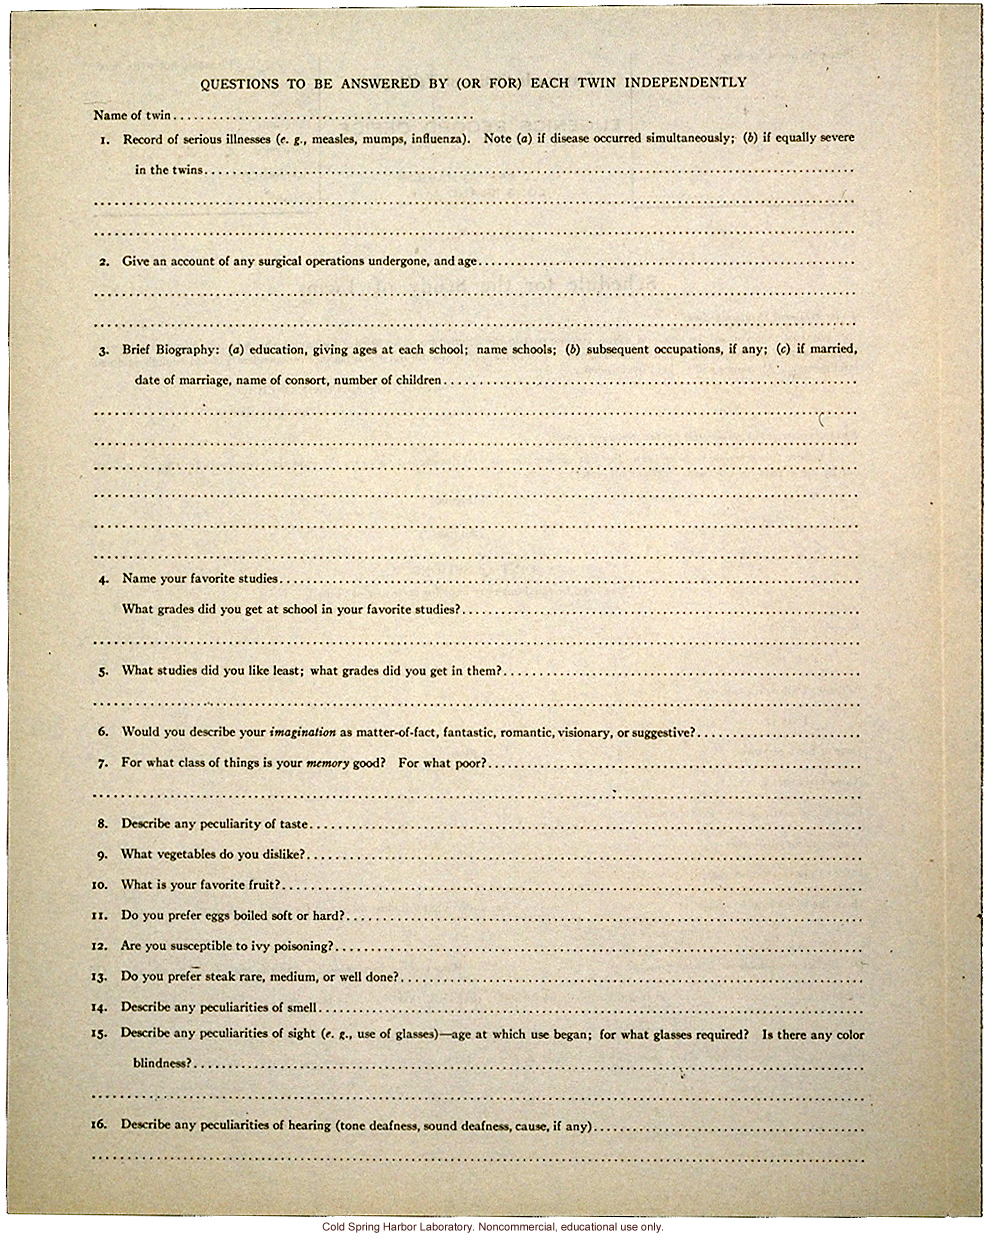 &quote;Schedule for the Study of Twins,&quote; Eugenics Record Office form